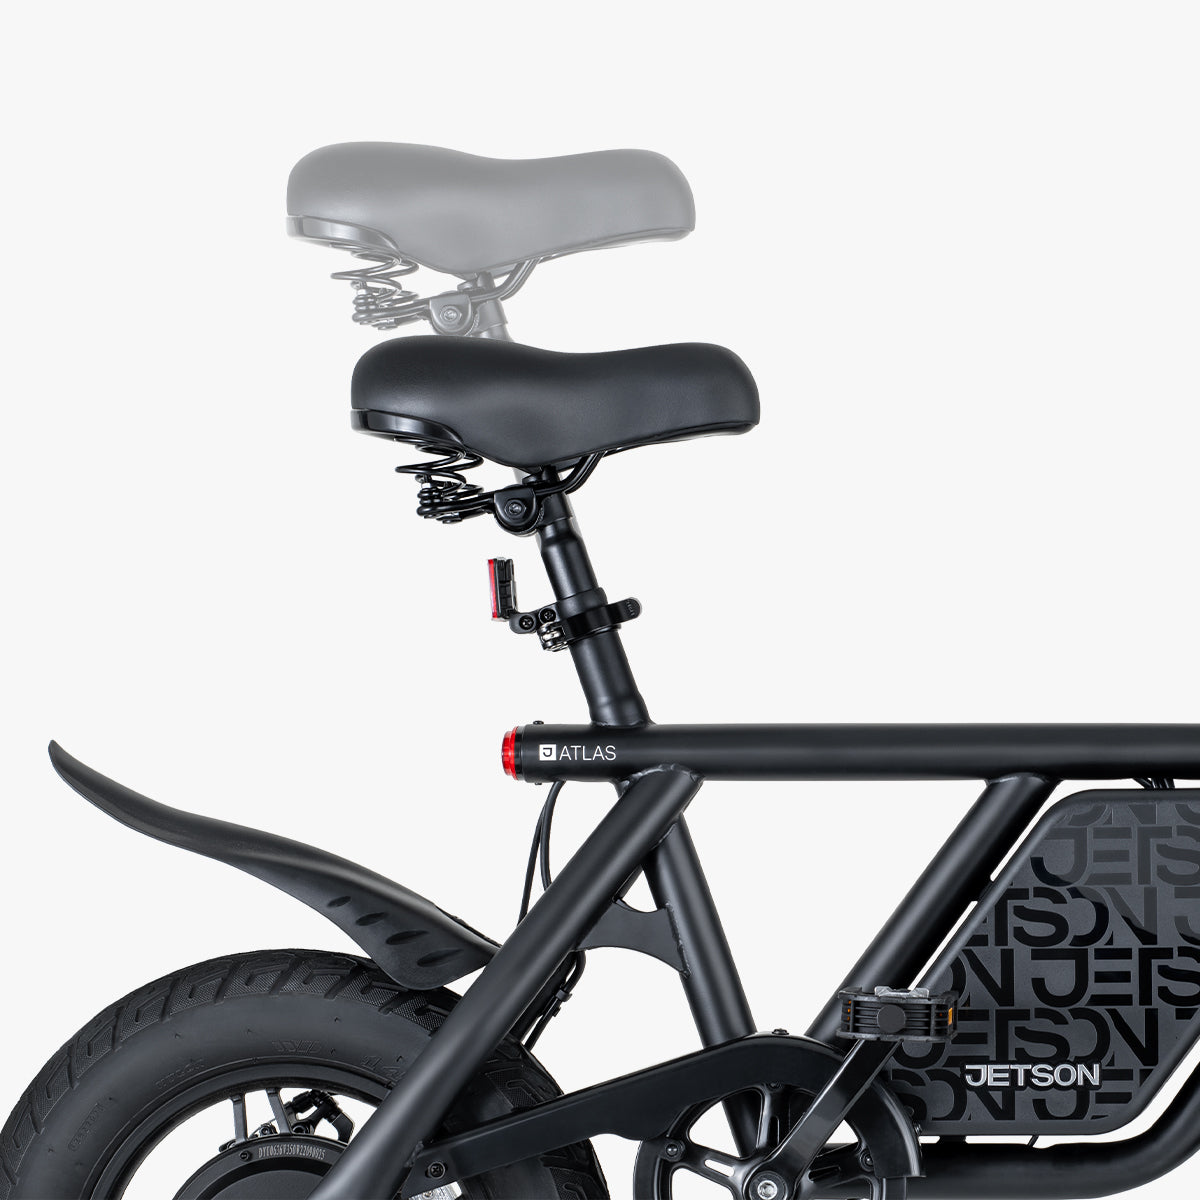 close up of the seat of the Atlas e-bike and it is being demonstrated how the seat height can be adjusted